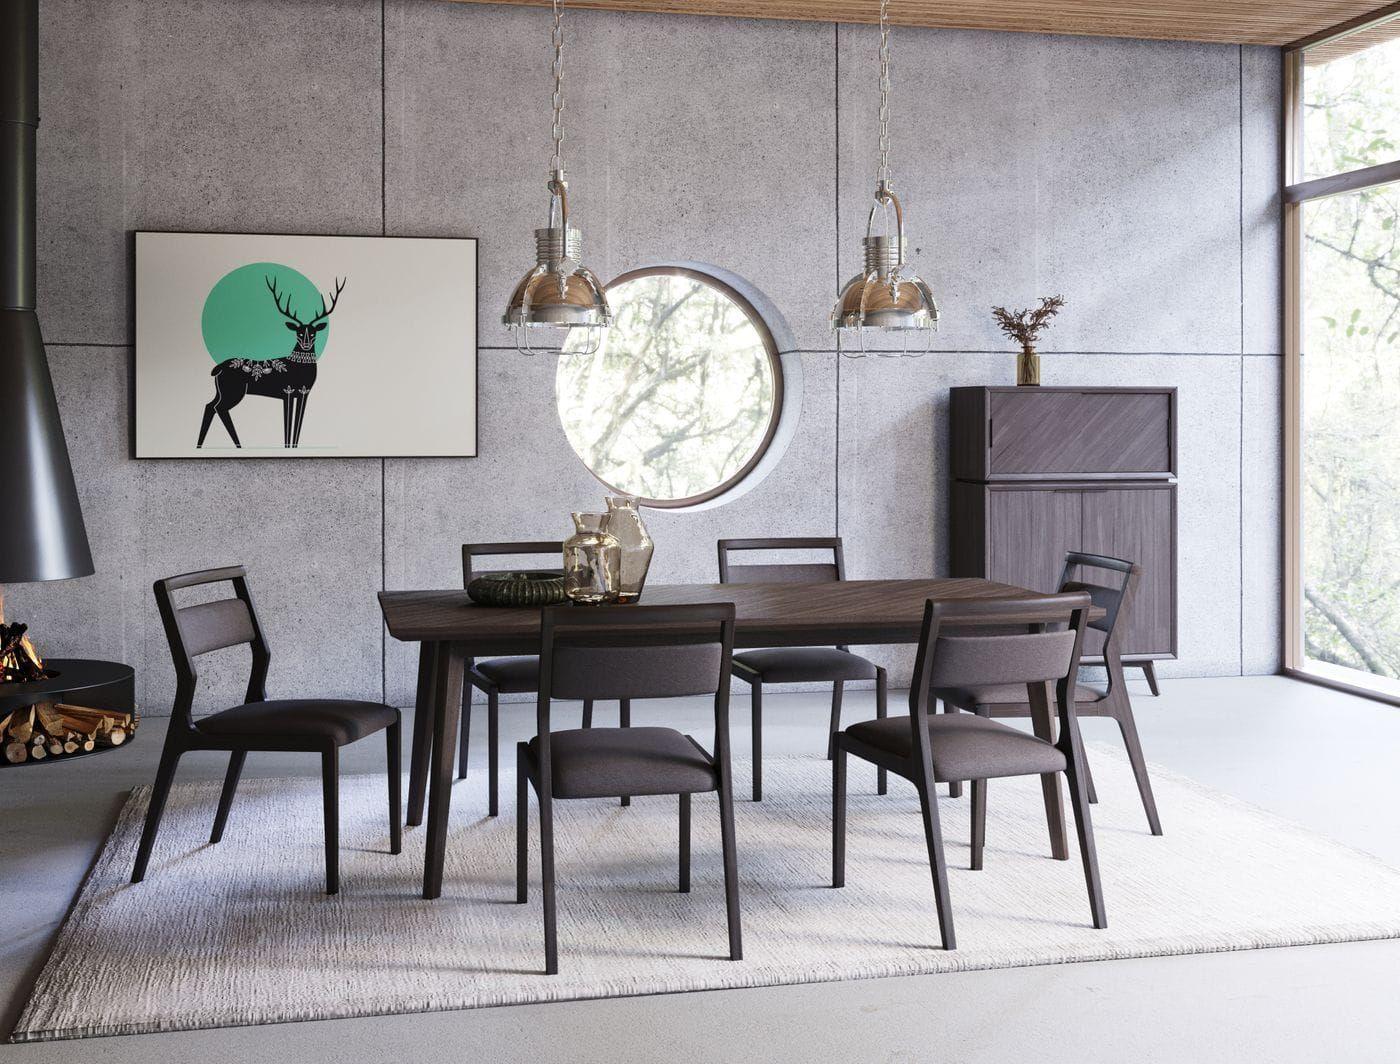 Contemporary, Modern Dining Room Set VGMABR-99-CHEST VGWDSTHLDT210-BRN-DT-6pcs in Brown 